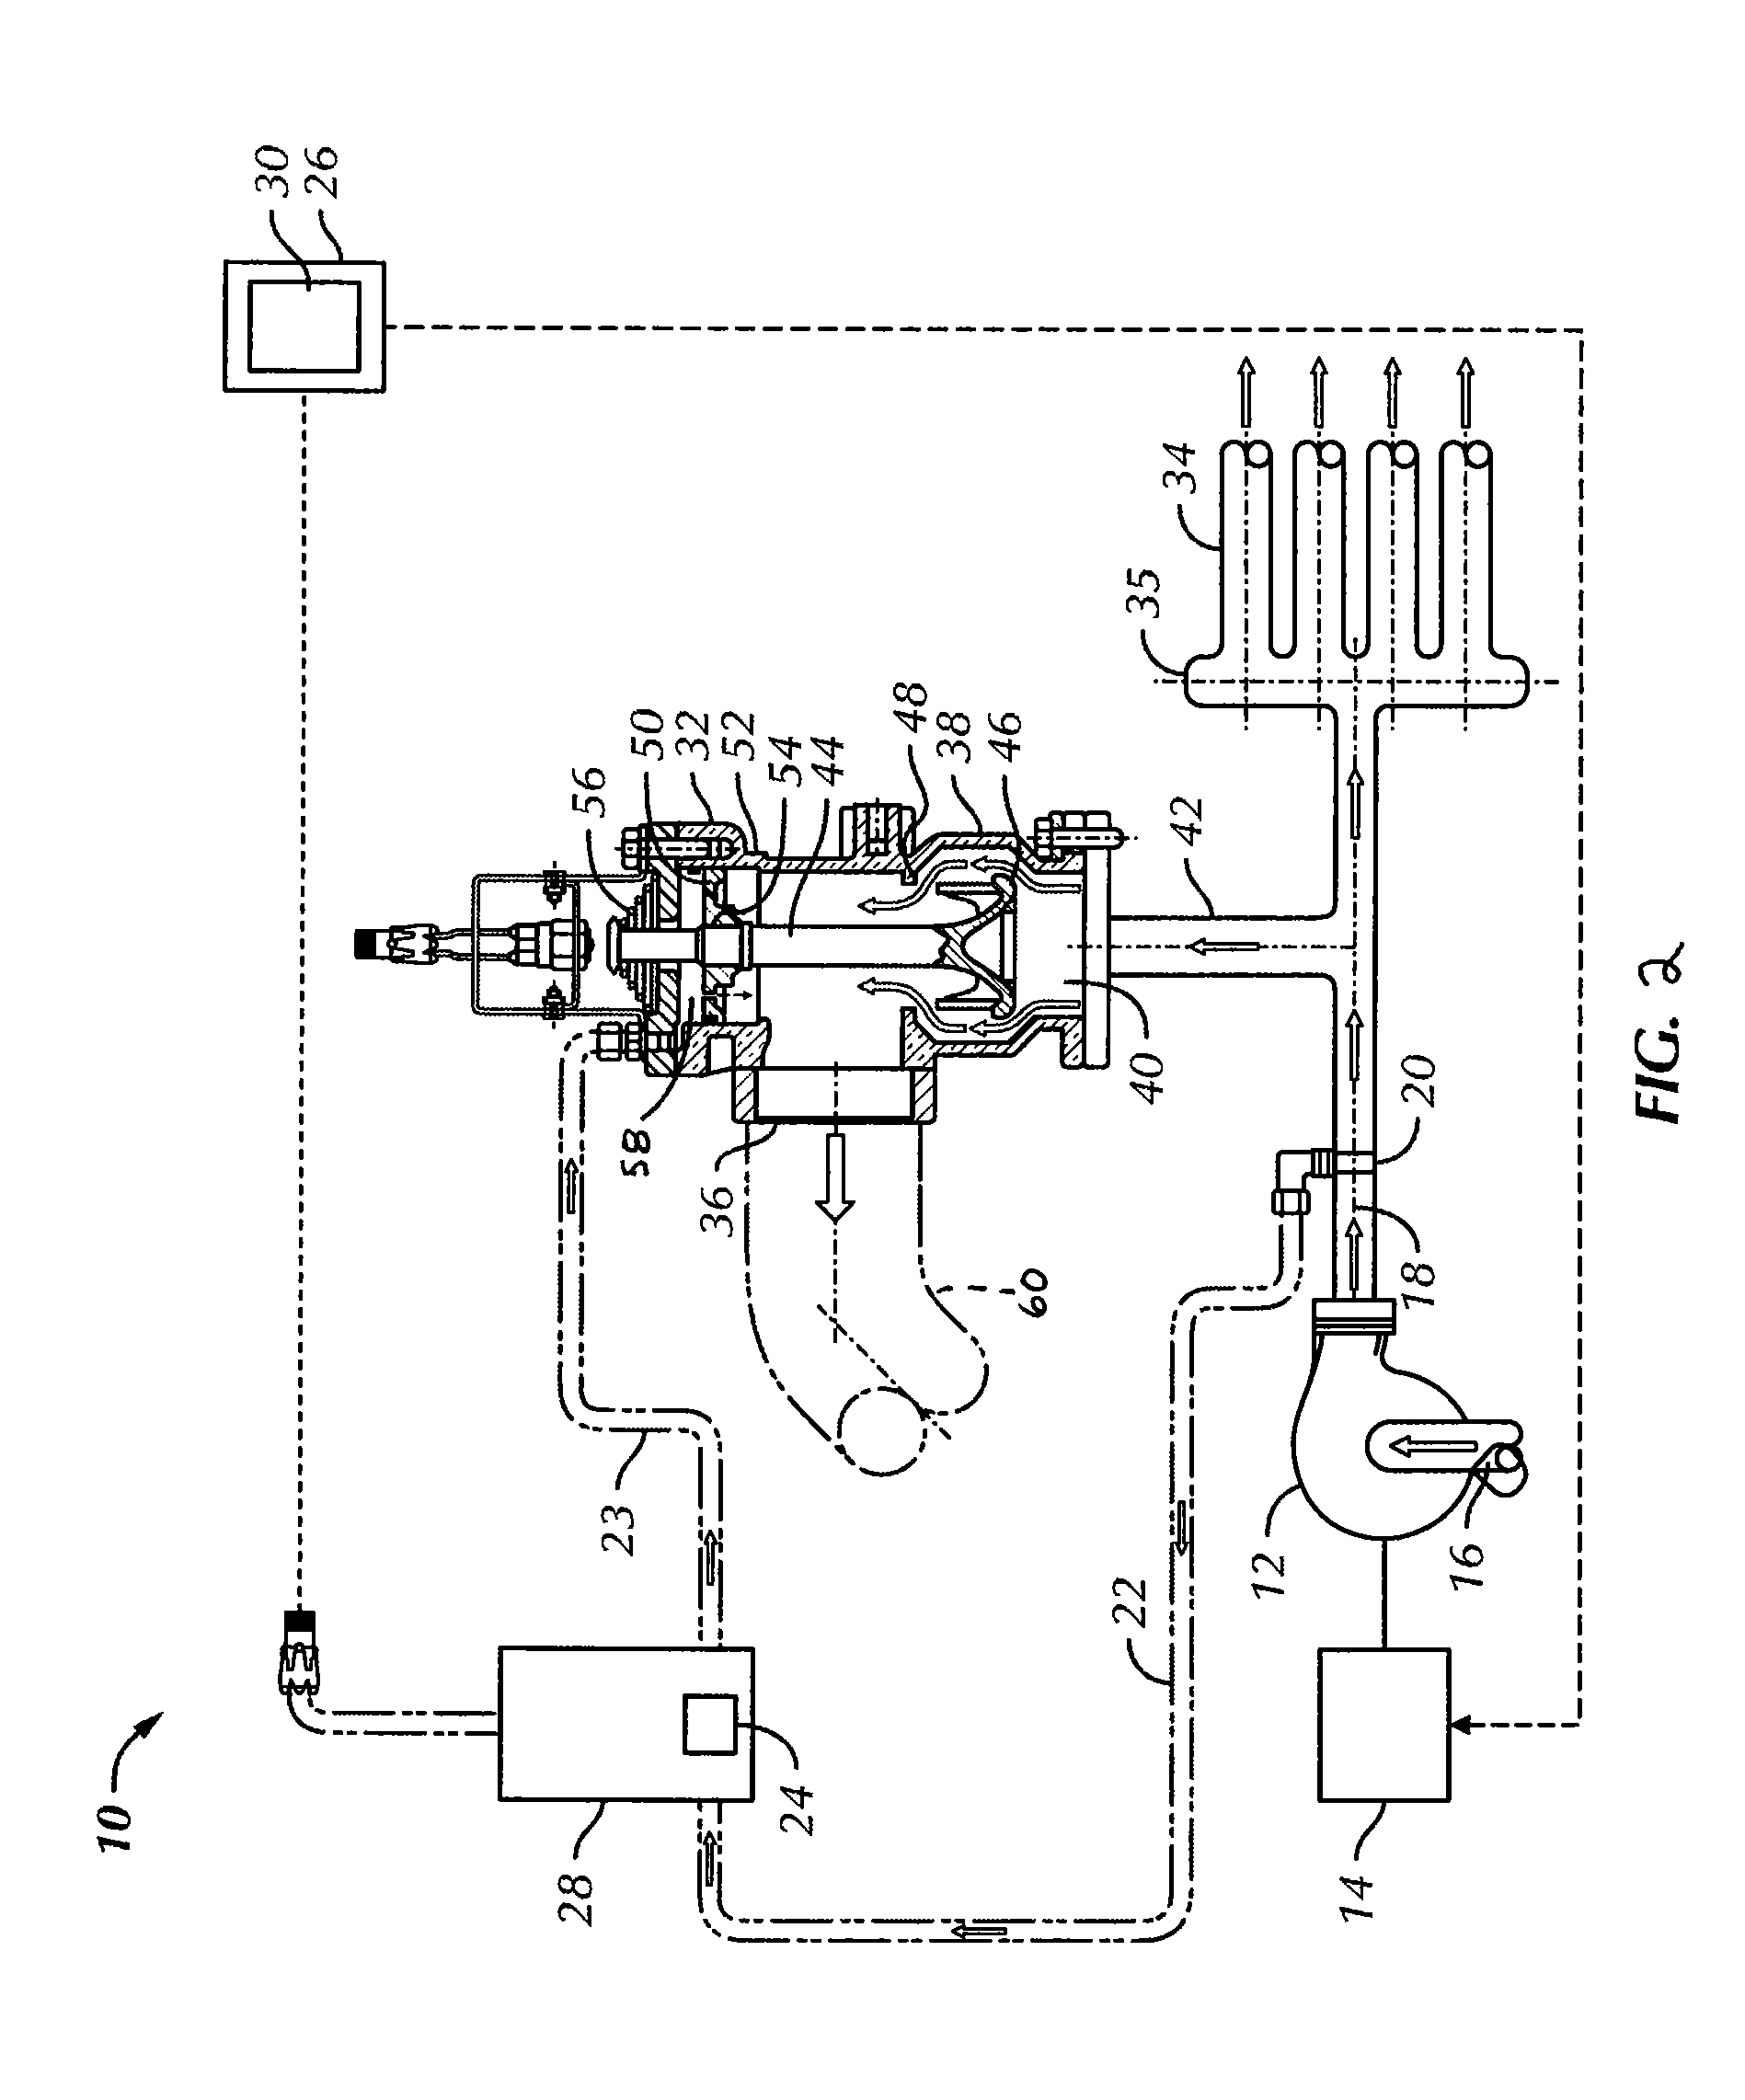 Method for controlling the discharge pressure of an engine-driven pump